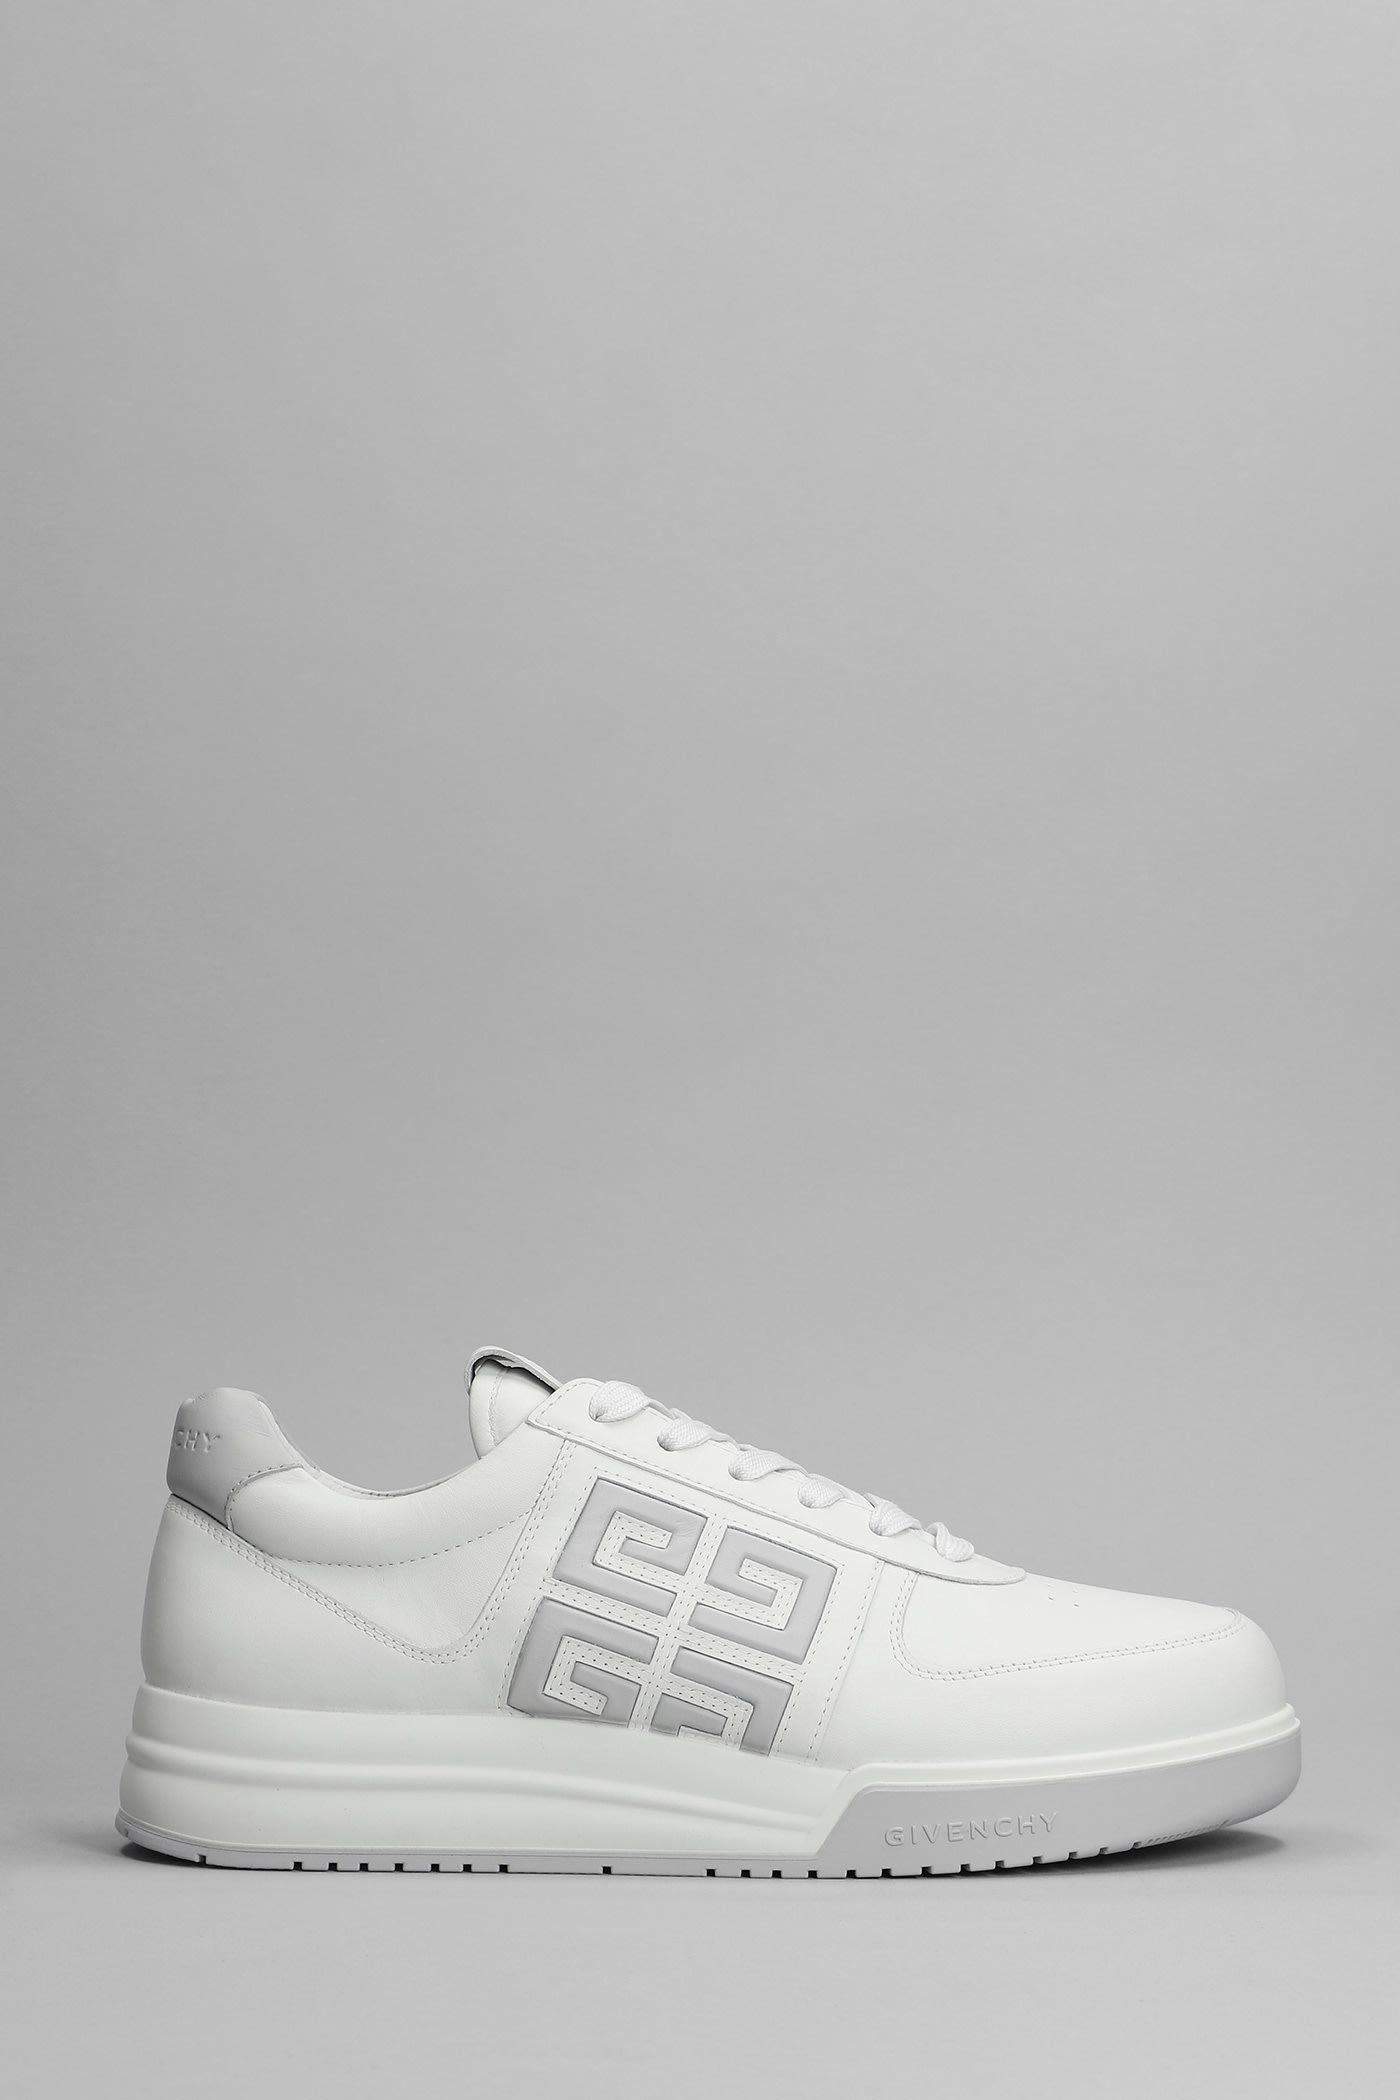 Givenchy G4 Low Sneakers In White Leather